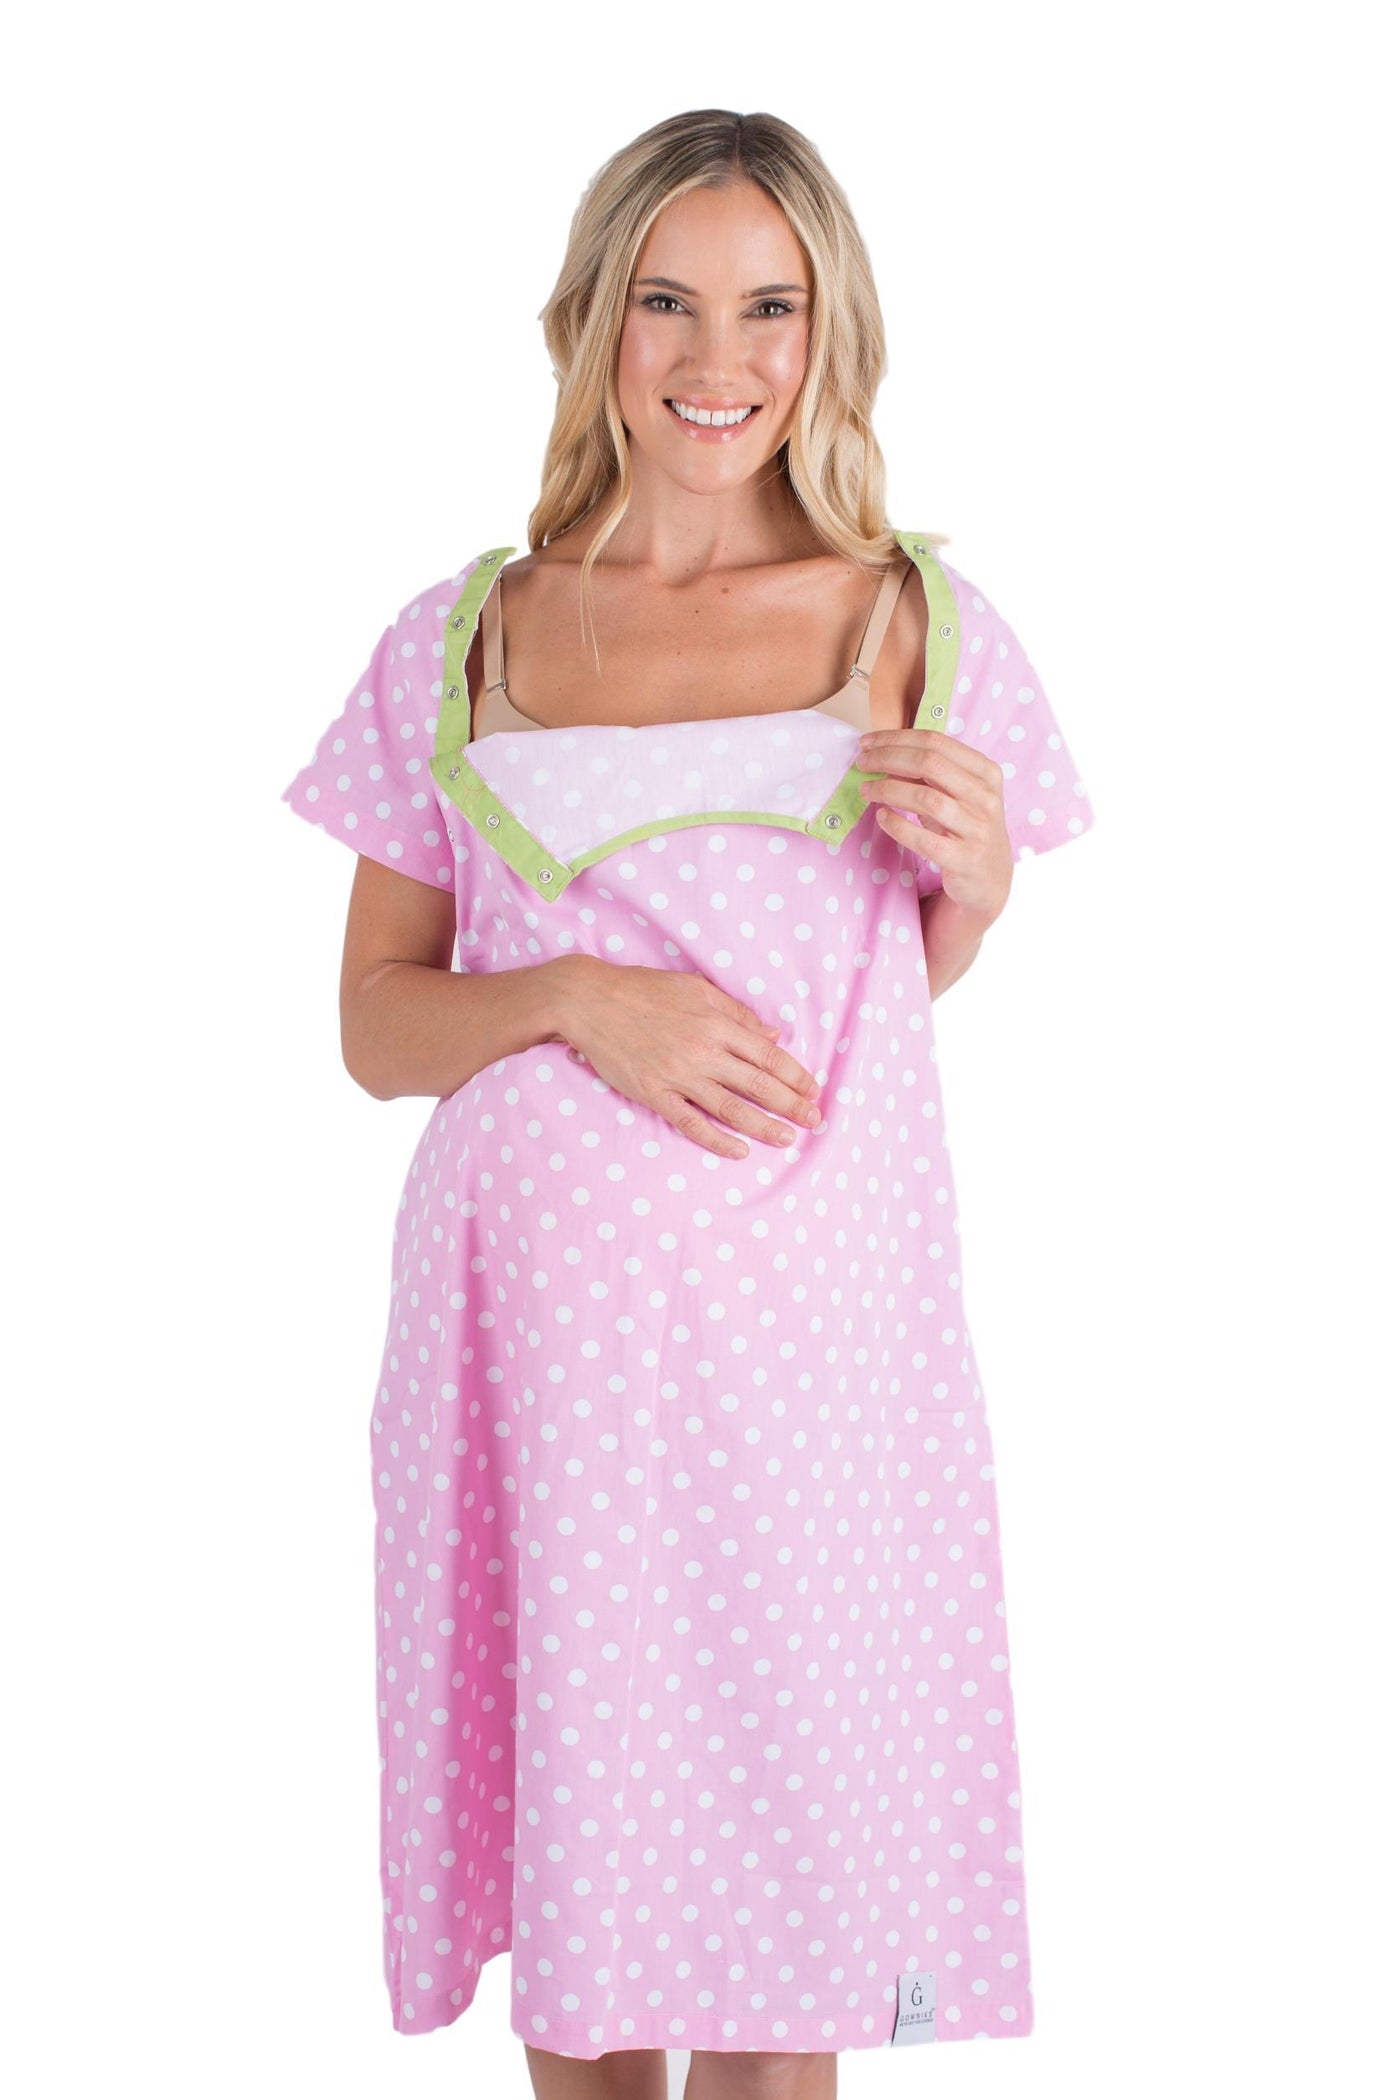 Molly Gownie Maternity Delivery Labor Hospital Birthing Gown – Gownies™